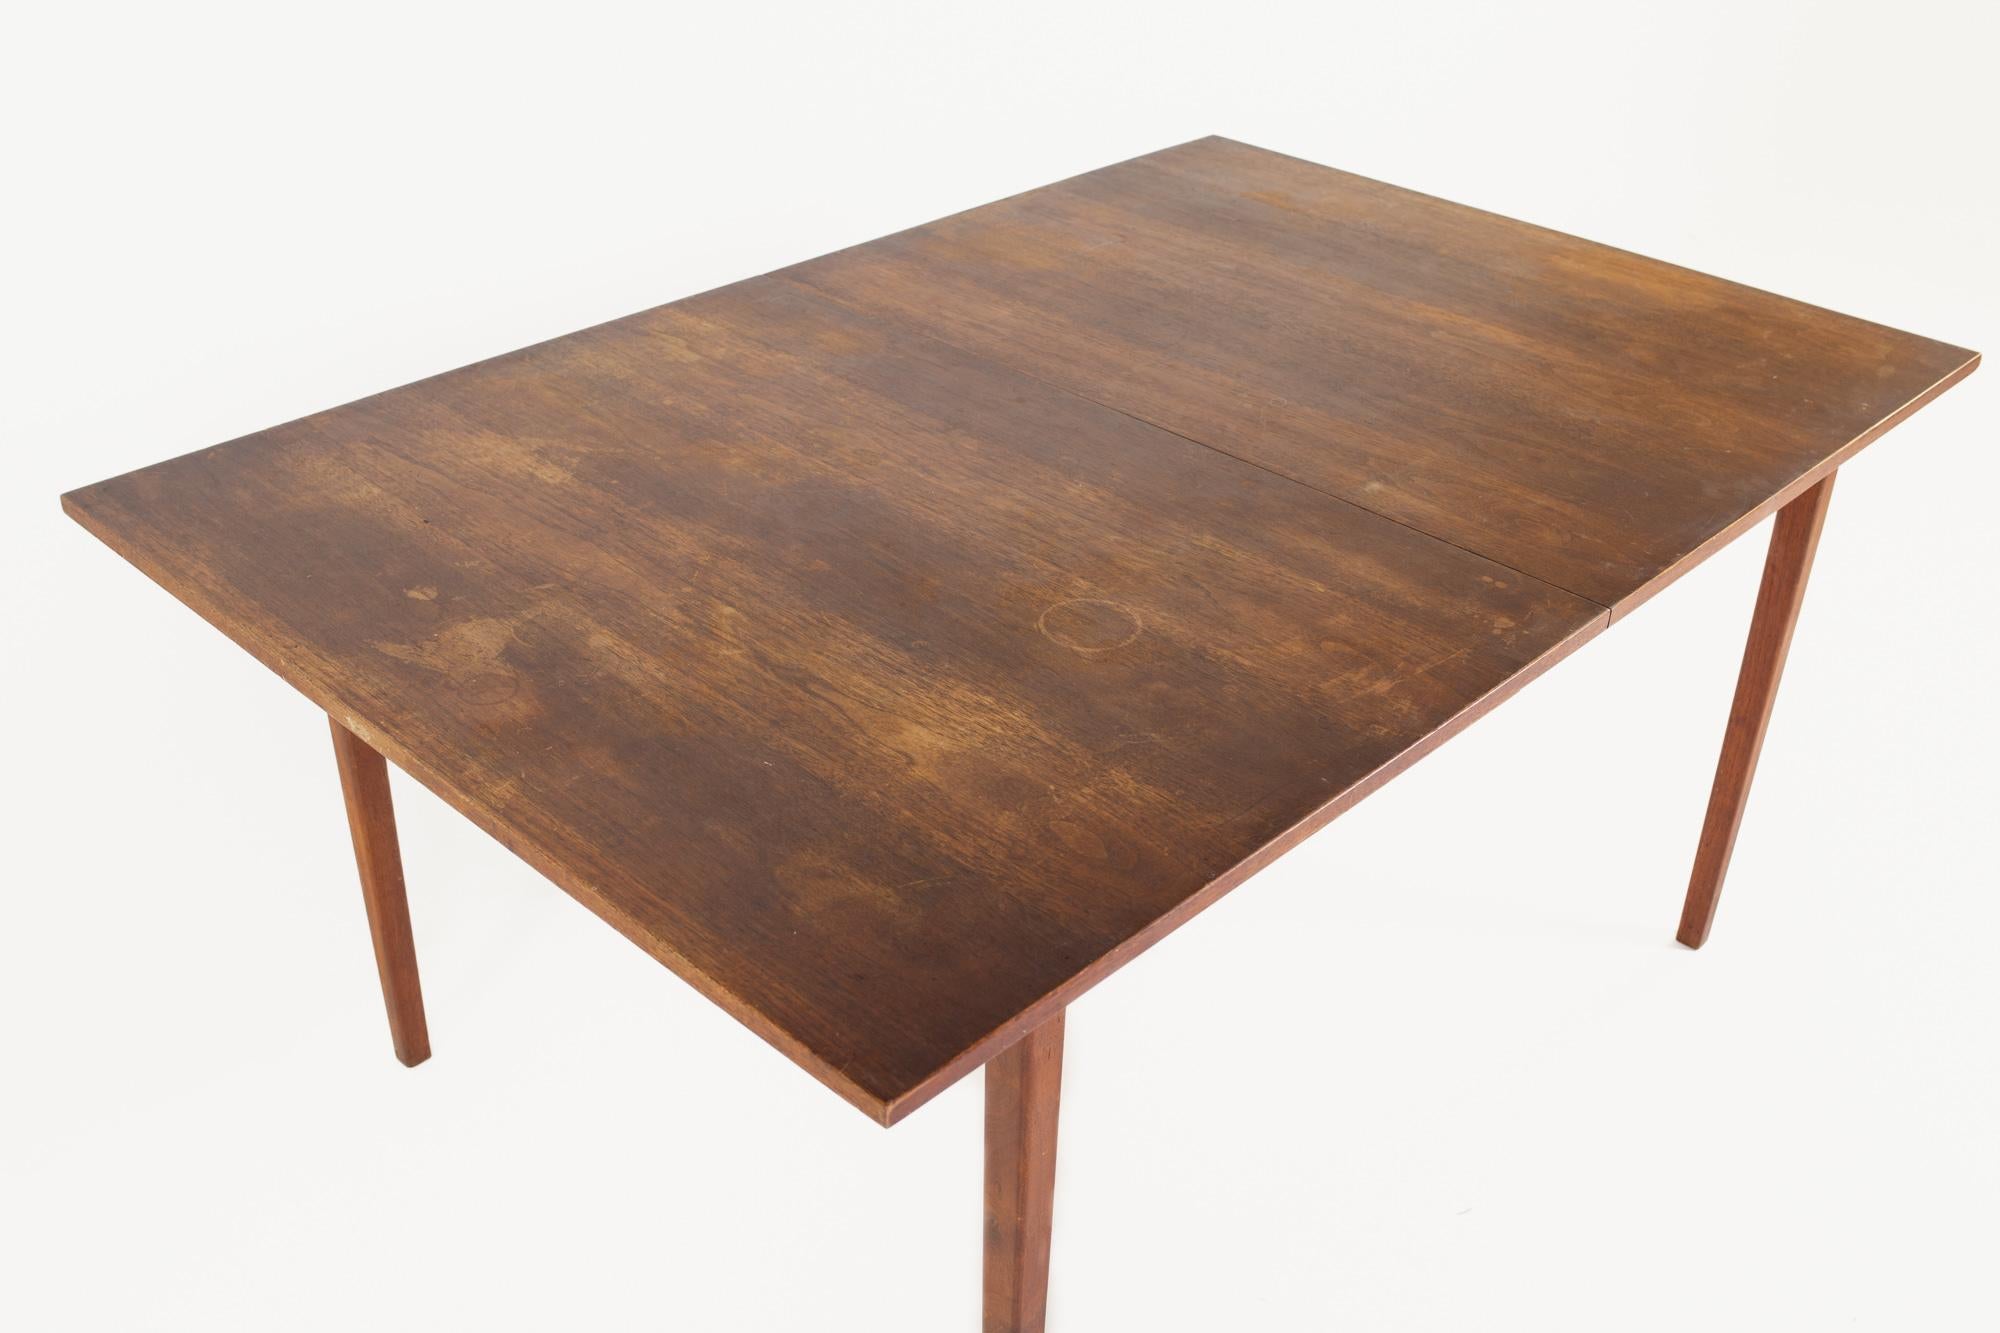 American John Stuart for Mount Airy Style Mid Century Walnut Dining Table with Leaf